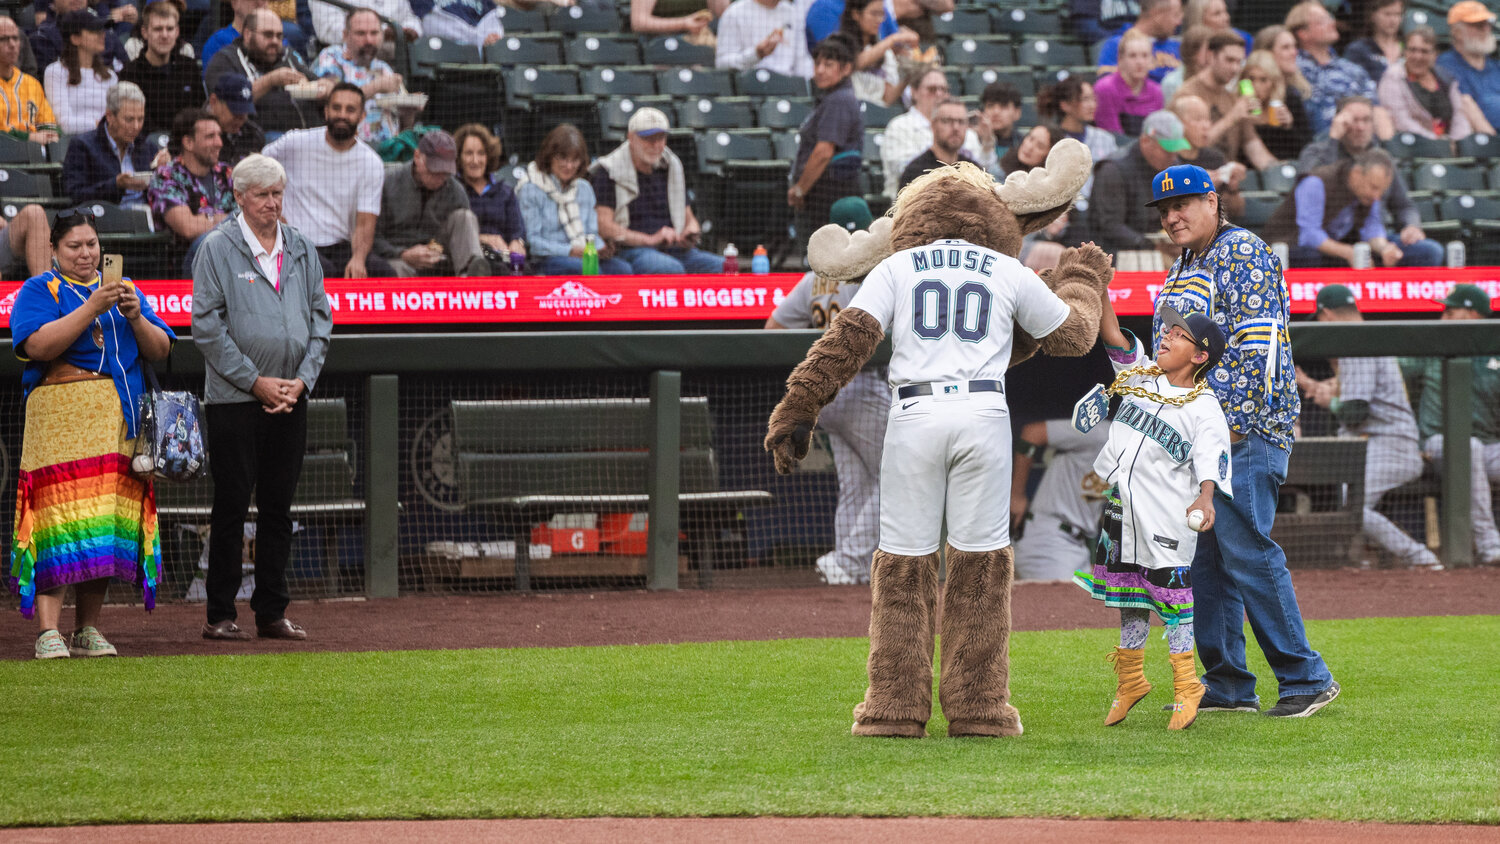 Payton KillEagle, a 7-year-old Mariners fan and cancer survivor, jumps up with her tongue out to high-five the Mariners Moose mascot after throwing out the first pitch as she is celebrated during Native American Heritage Night in Seattle on Monday, Aug. 28.